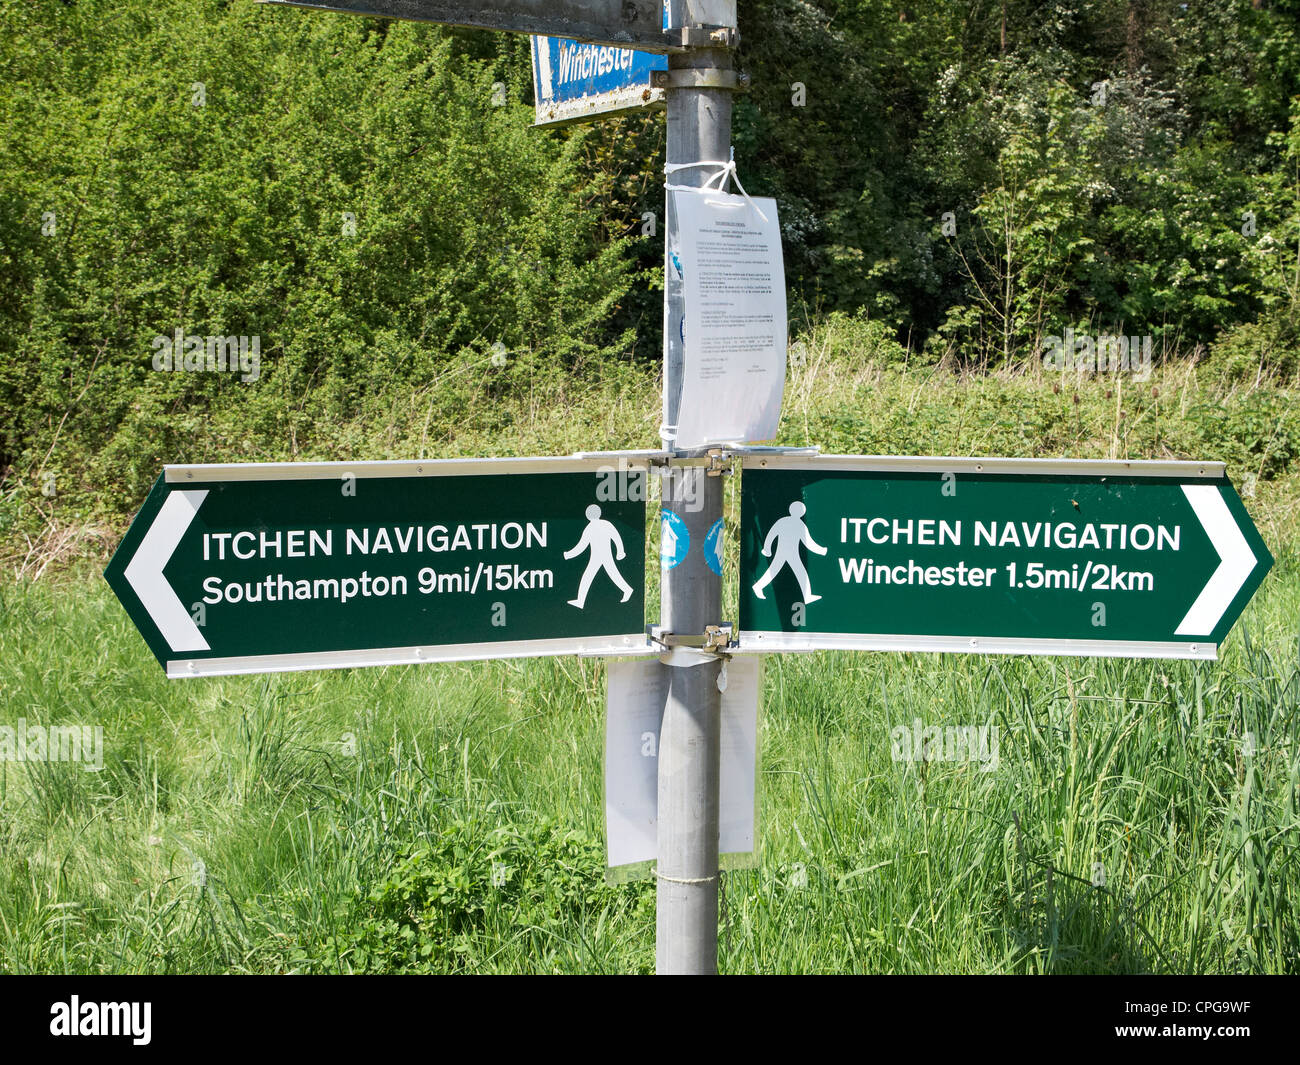 Signposts near Winchester showing directions for walking along the Itchen Navigation a semi-derelict canal in Hampshire. Stock Photo